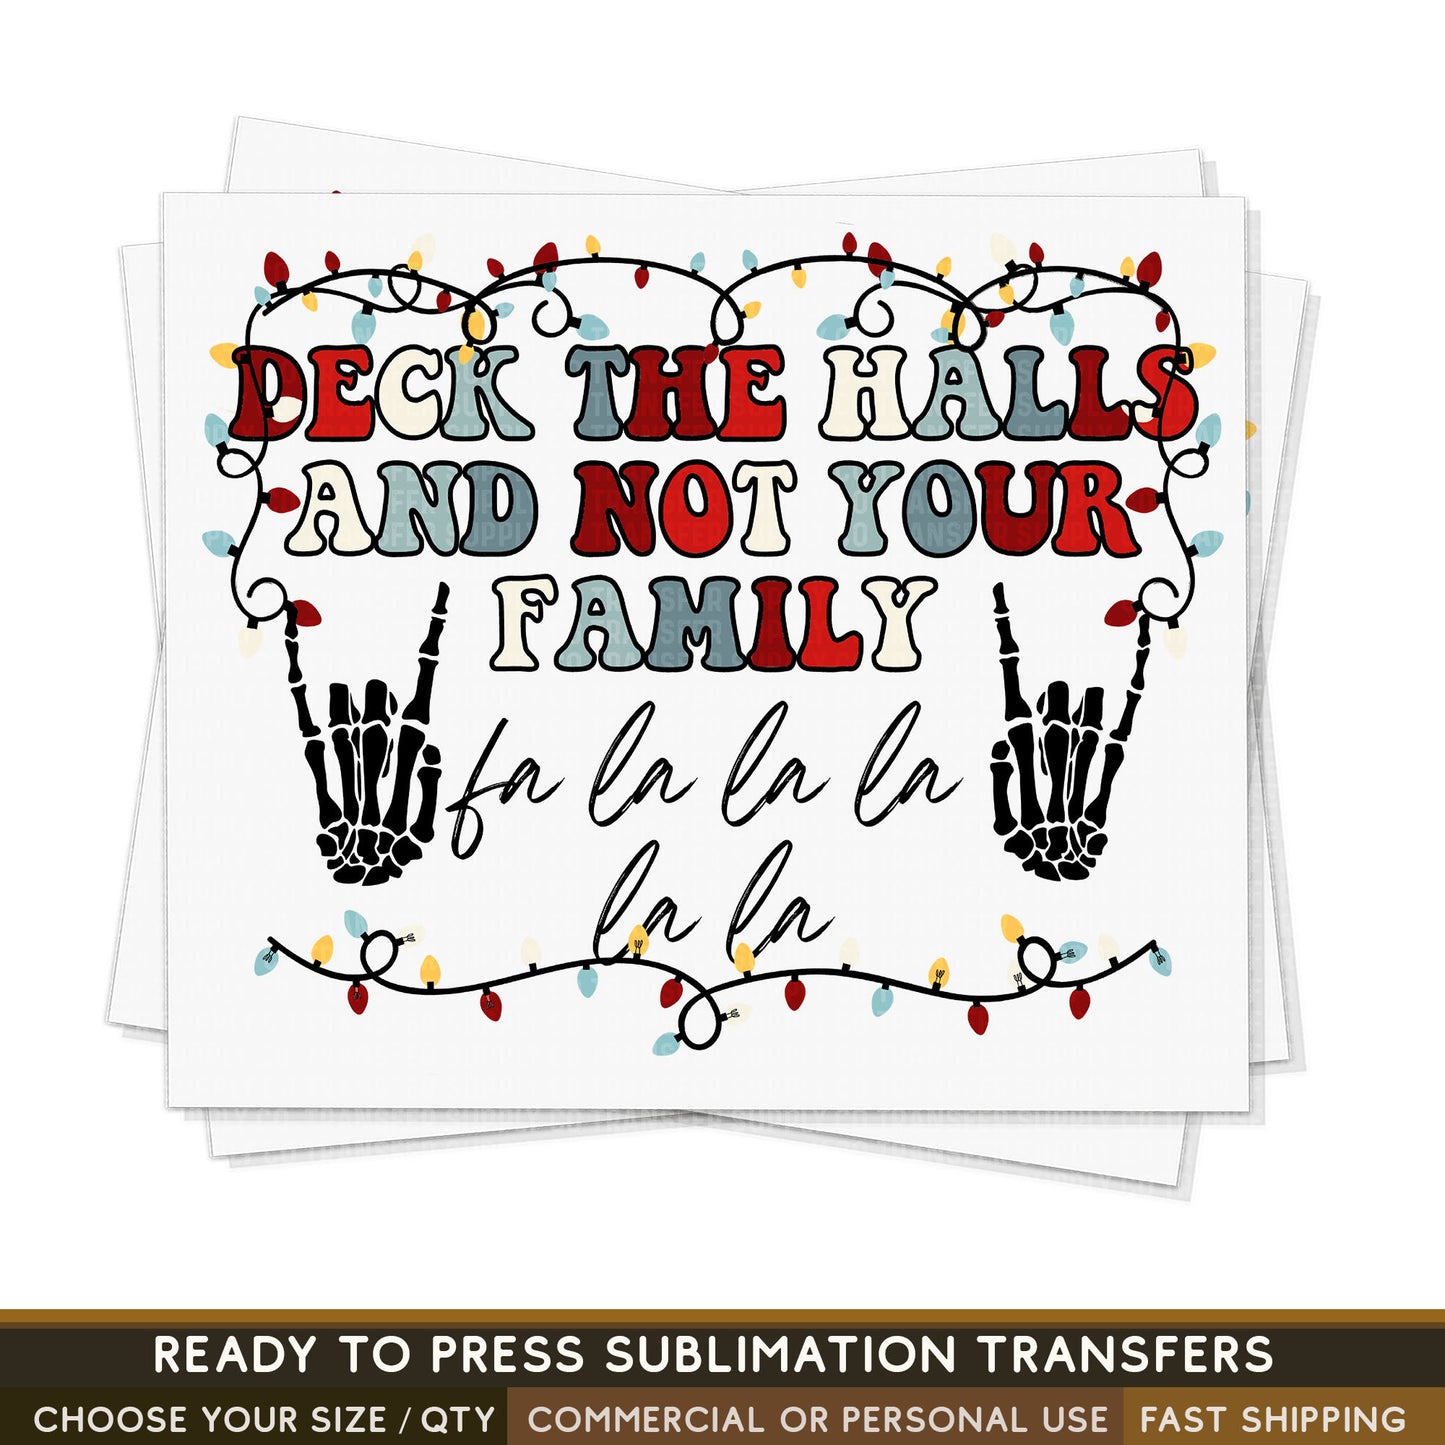 Deck The Halls And Not Your Family, Funny Christmas Shirt Print, Ready To Press Sublimation Transfers, RTP Transfers, Sublimation Prints